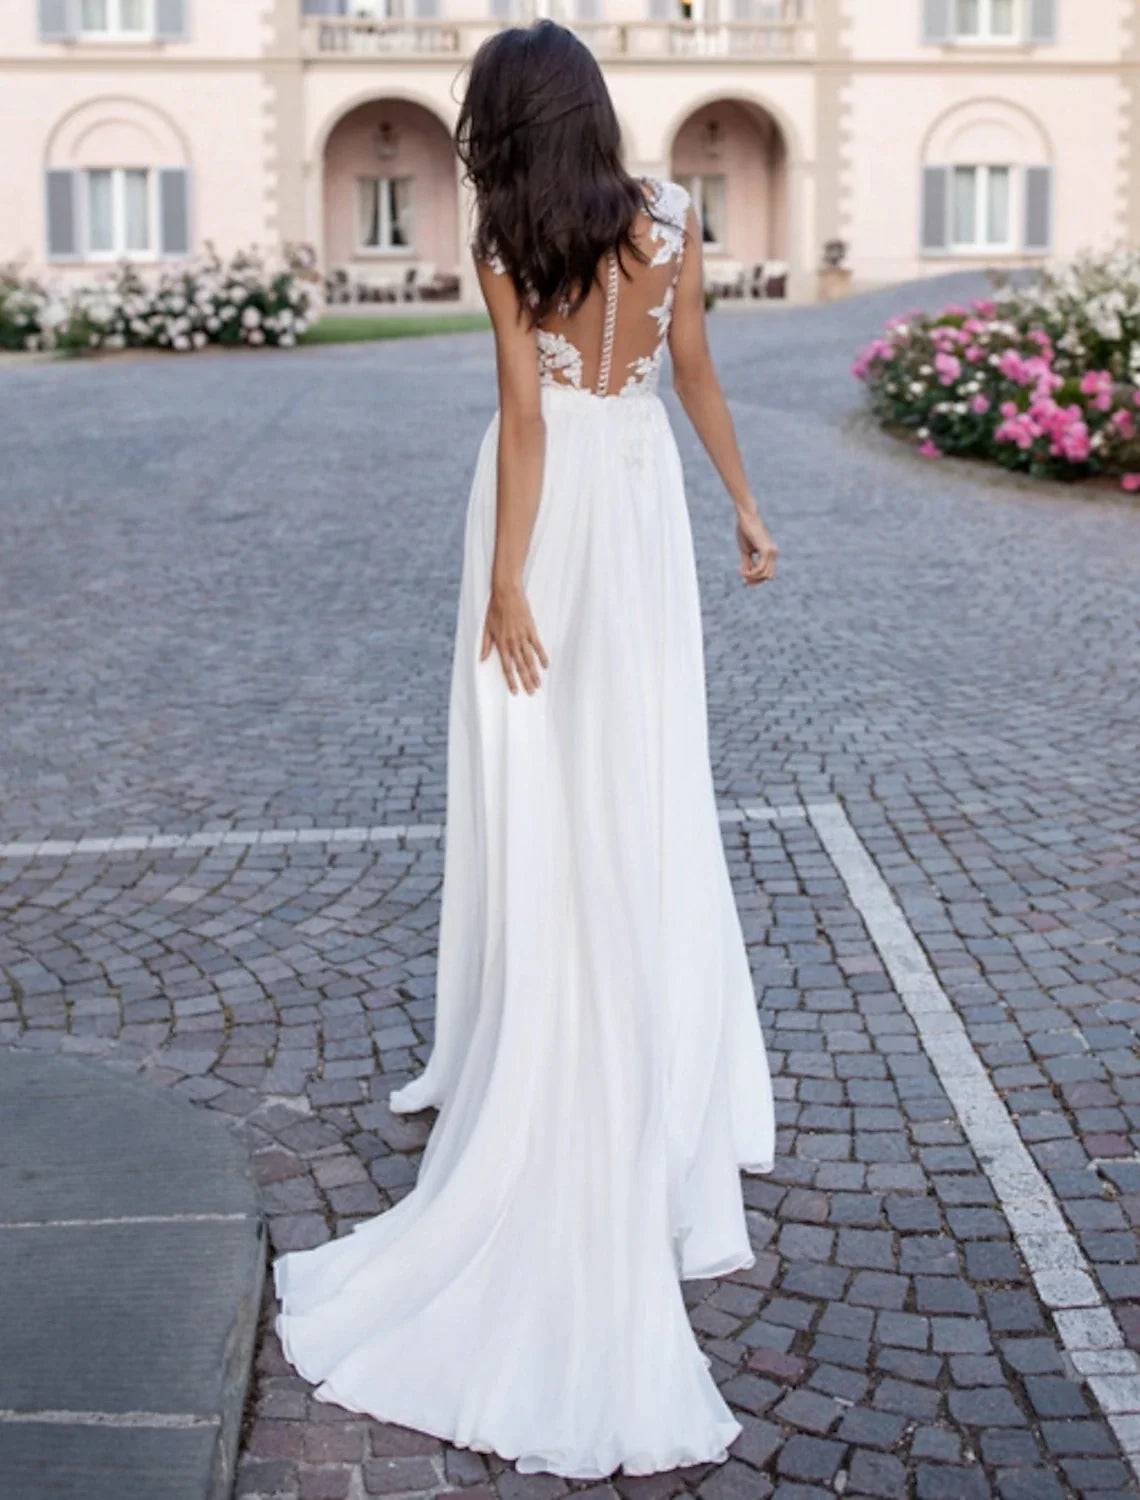 Beach Open Back Wedding Dresses A-Line Illusion Neck Cap Sleeve Sweep / Brush Train Chiffon Bridal Gowns With Appliques Split Front